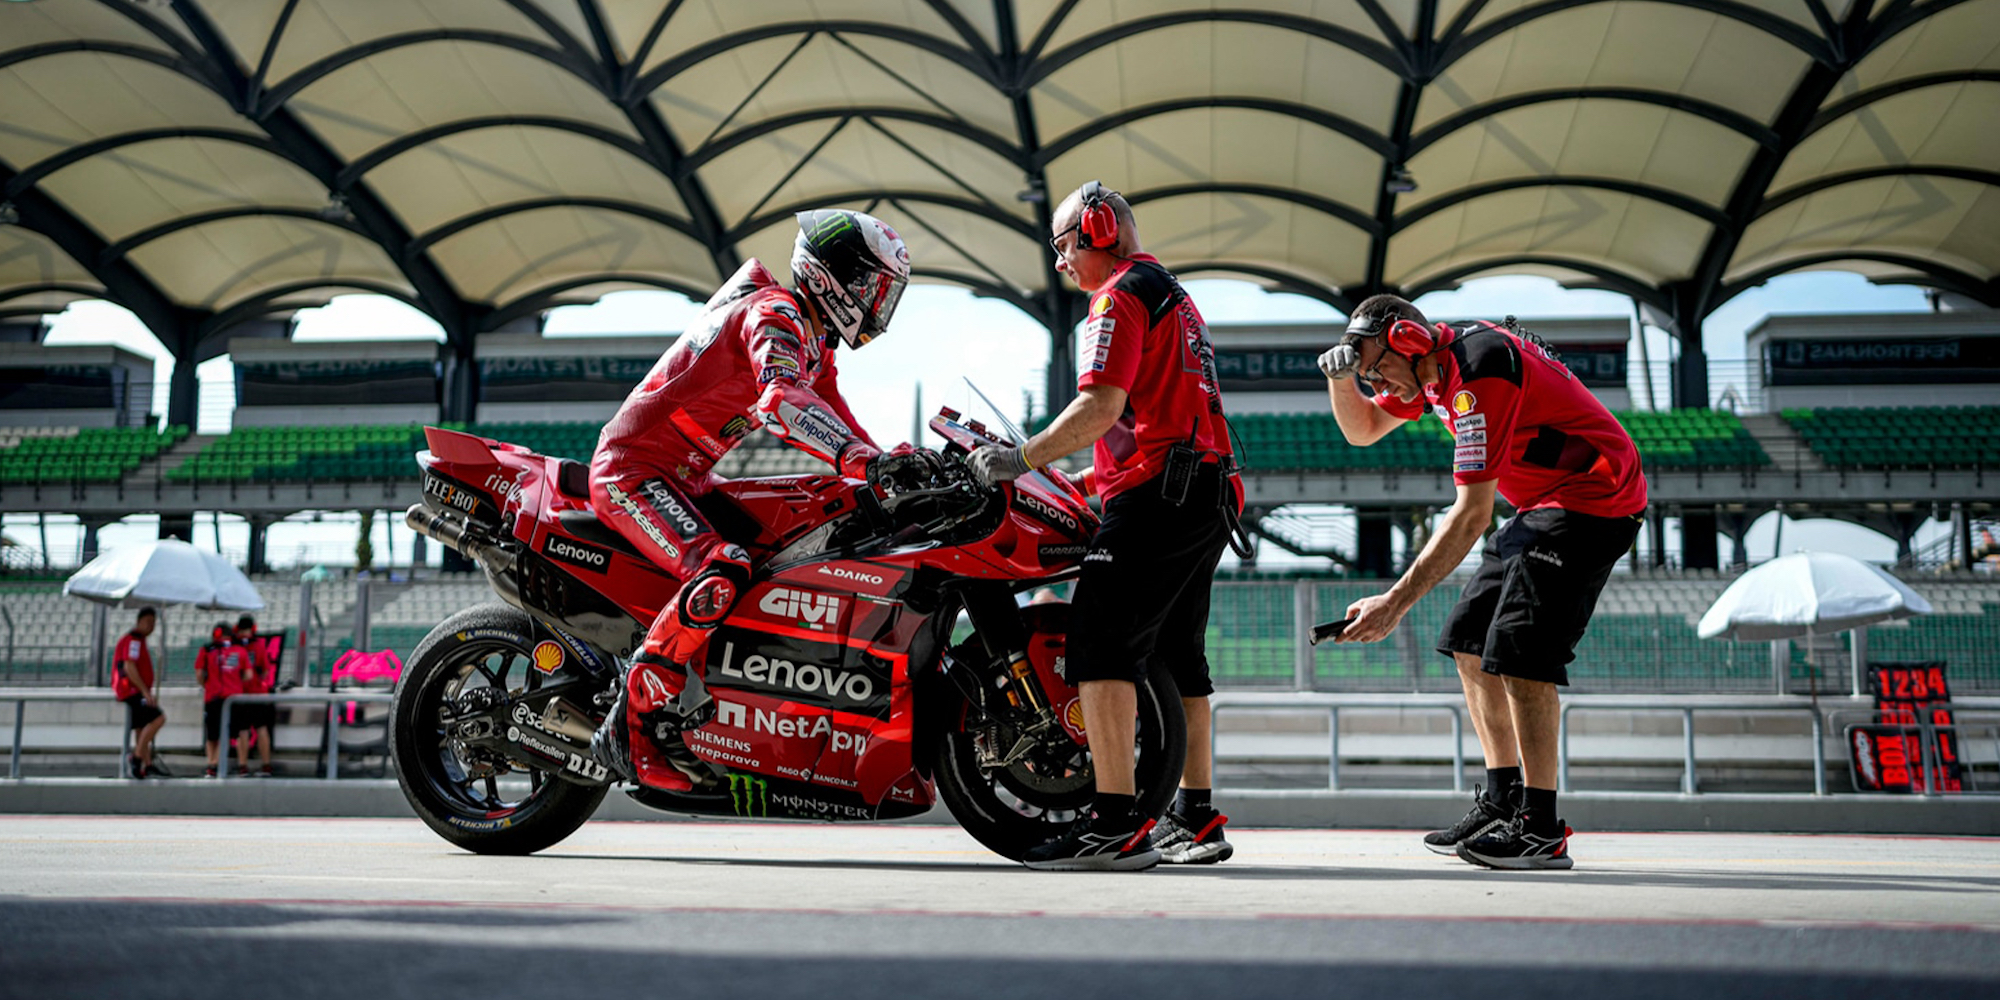 MotoGP: Ducati Sets Record for “Most wins in the Season”